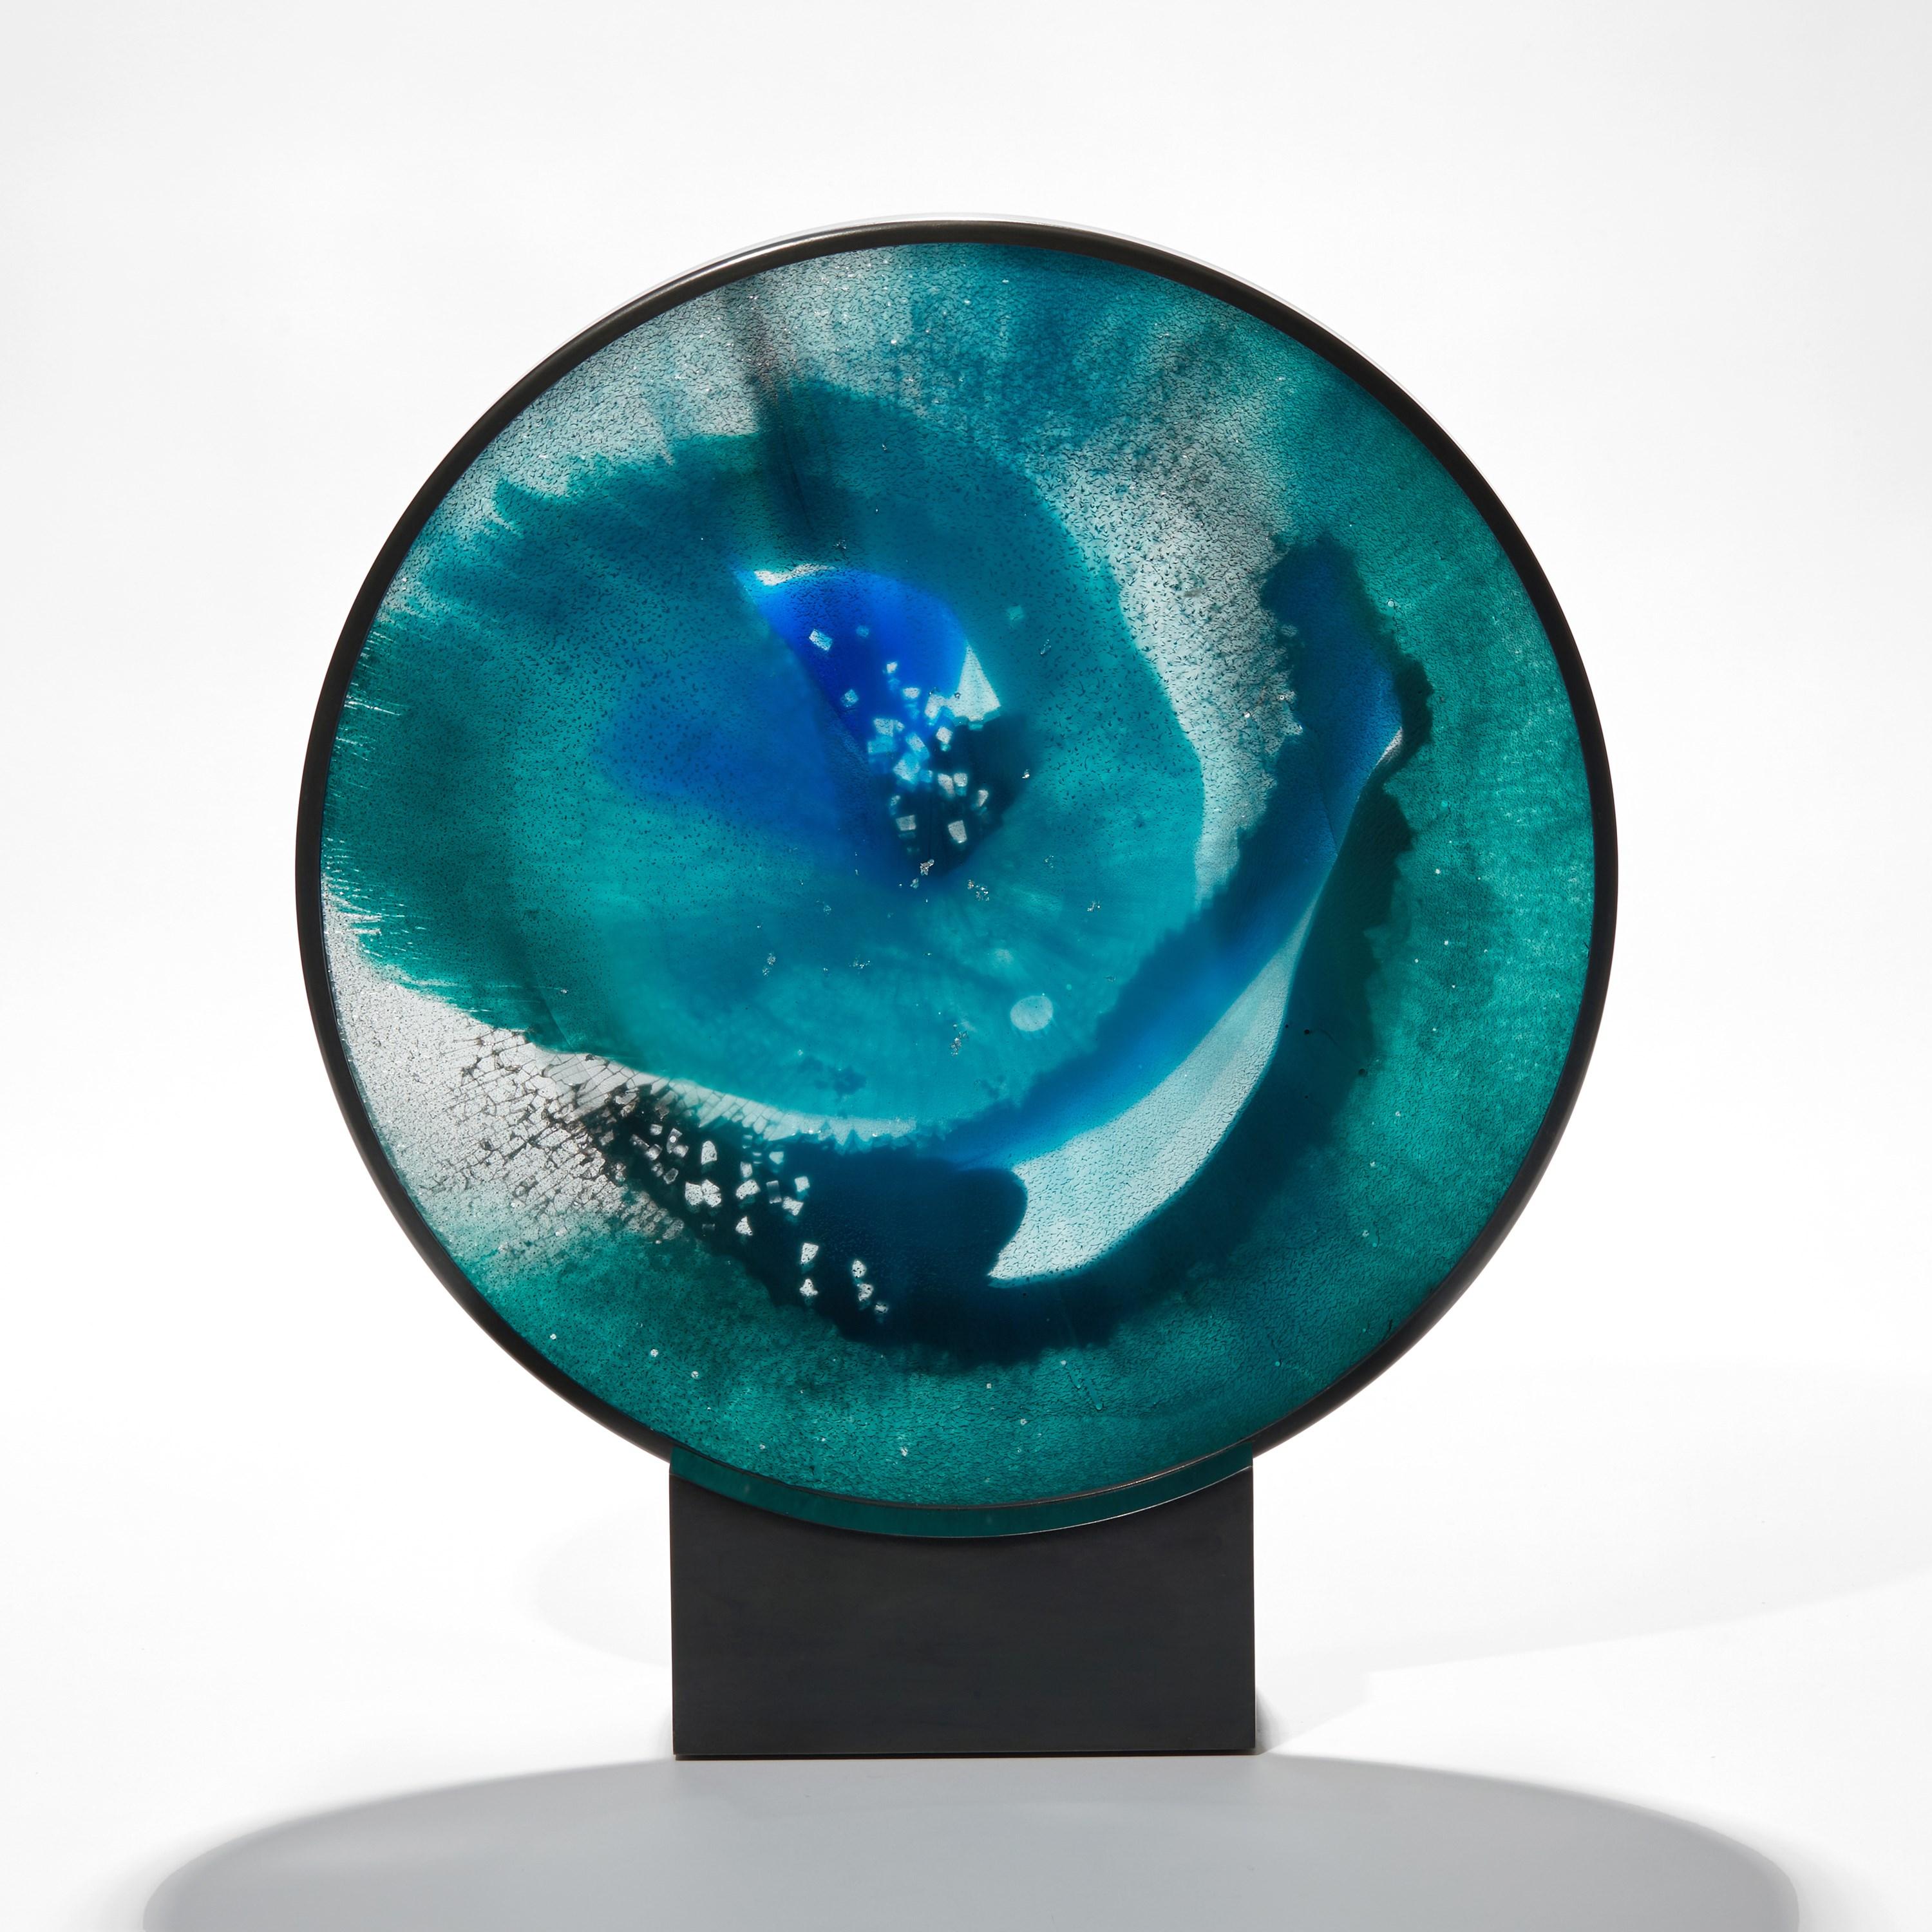 Cypriot Eye of Discovery, a Blue & Black Abstract Glass Artwork by Yorgos Papadopoulos For Sale